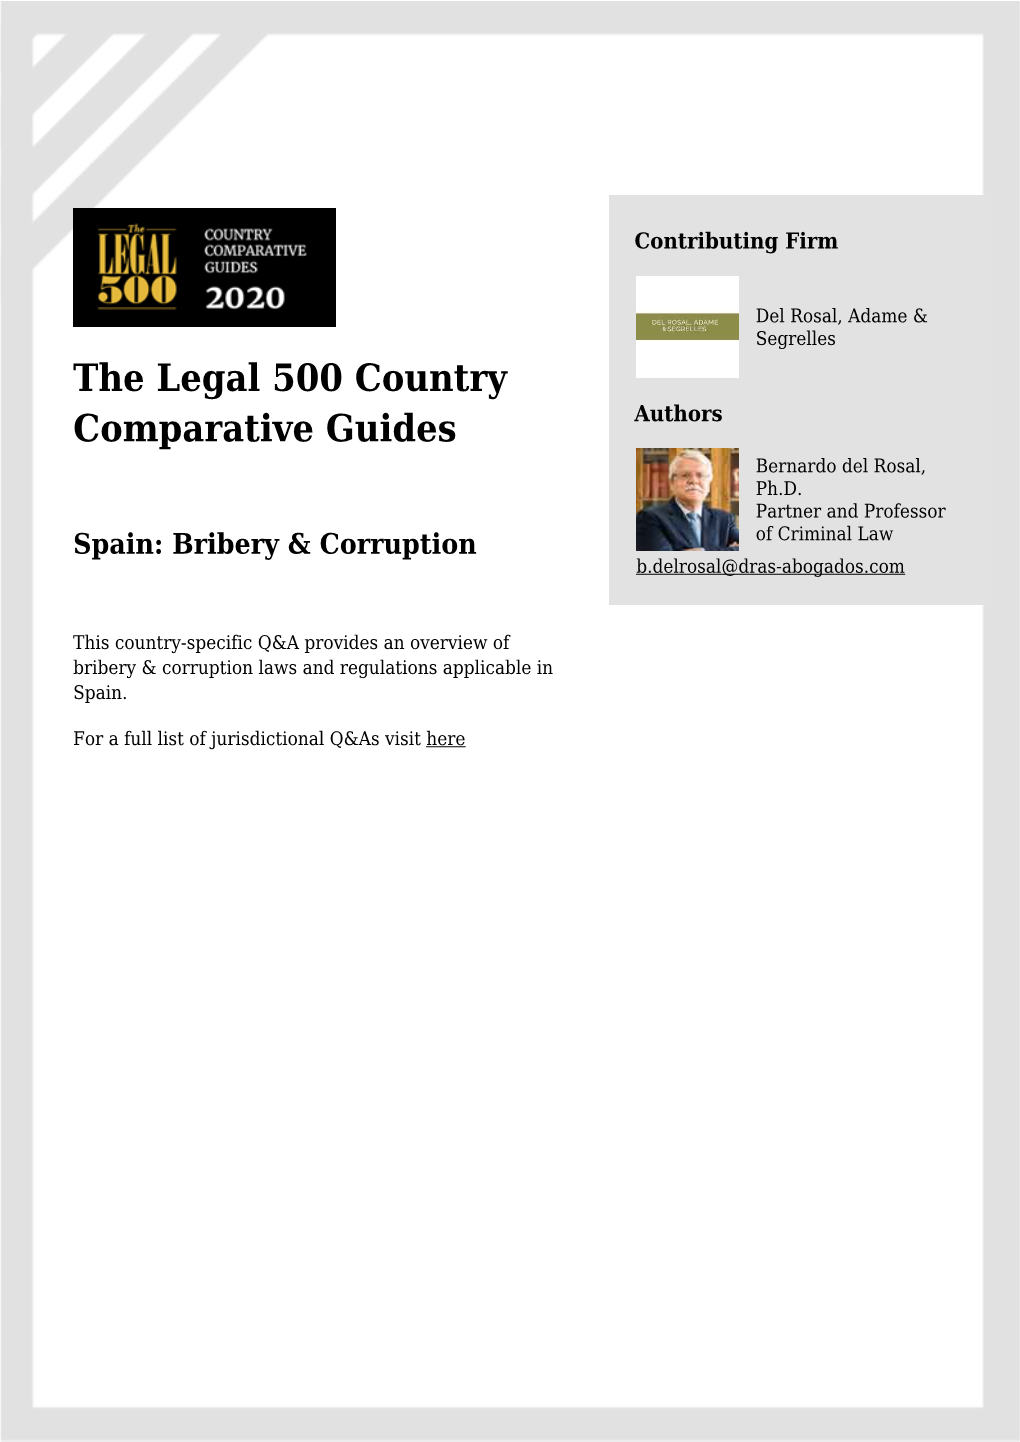 The Legal 500 Country Comparative Guides Spain: Bribery & Corruption